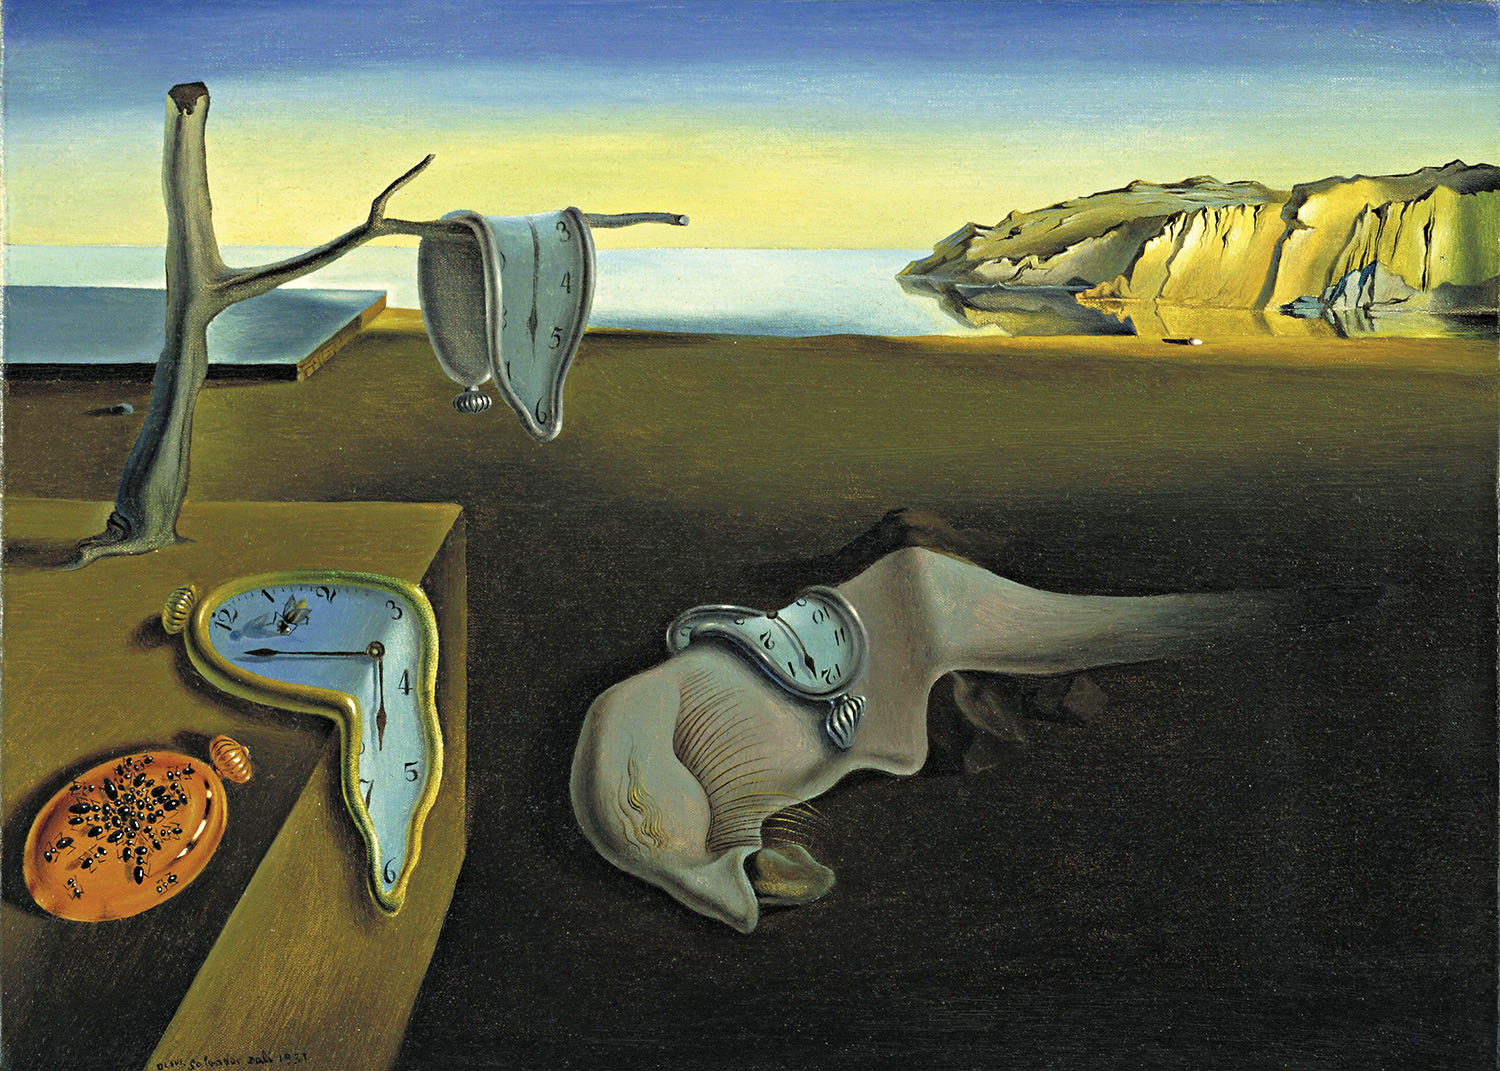 The Persistence of Memory Surrealism Jigsaw Puzzle